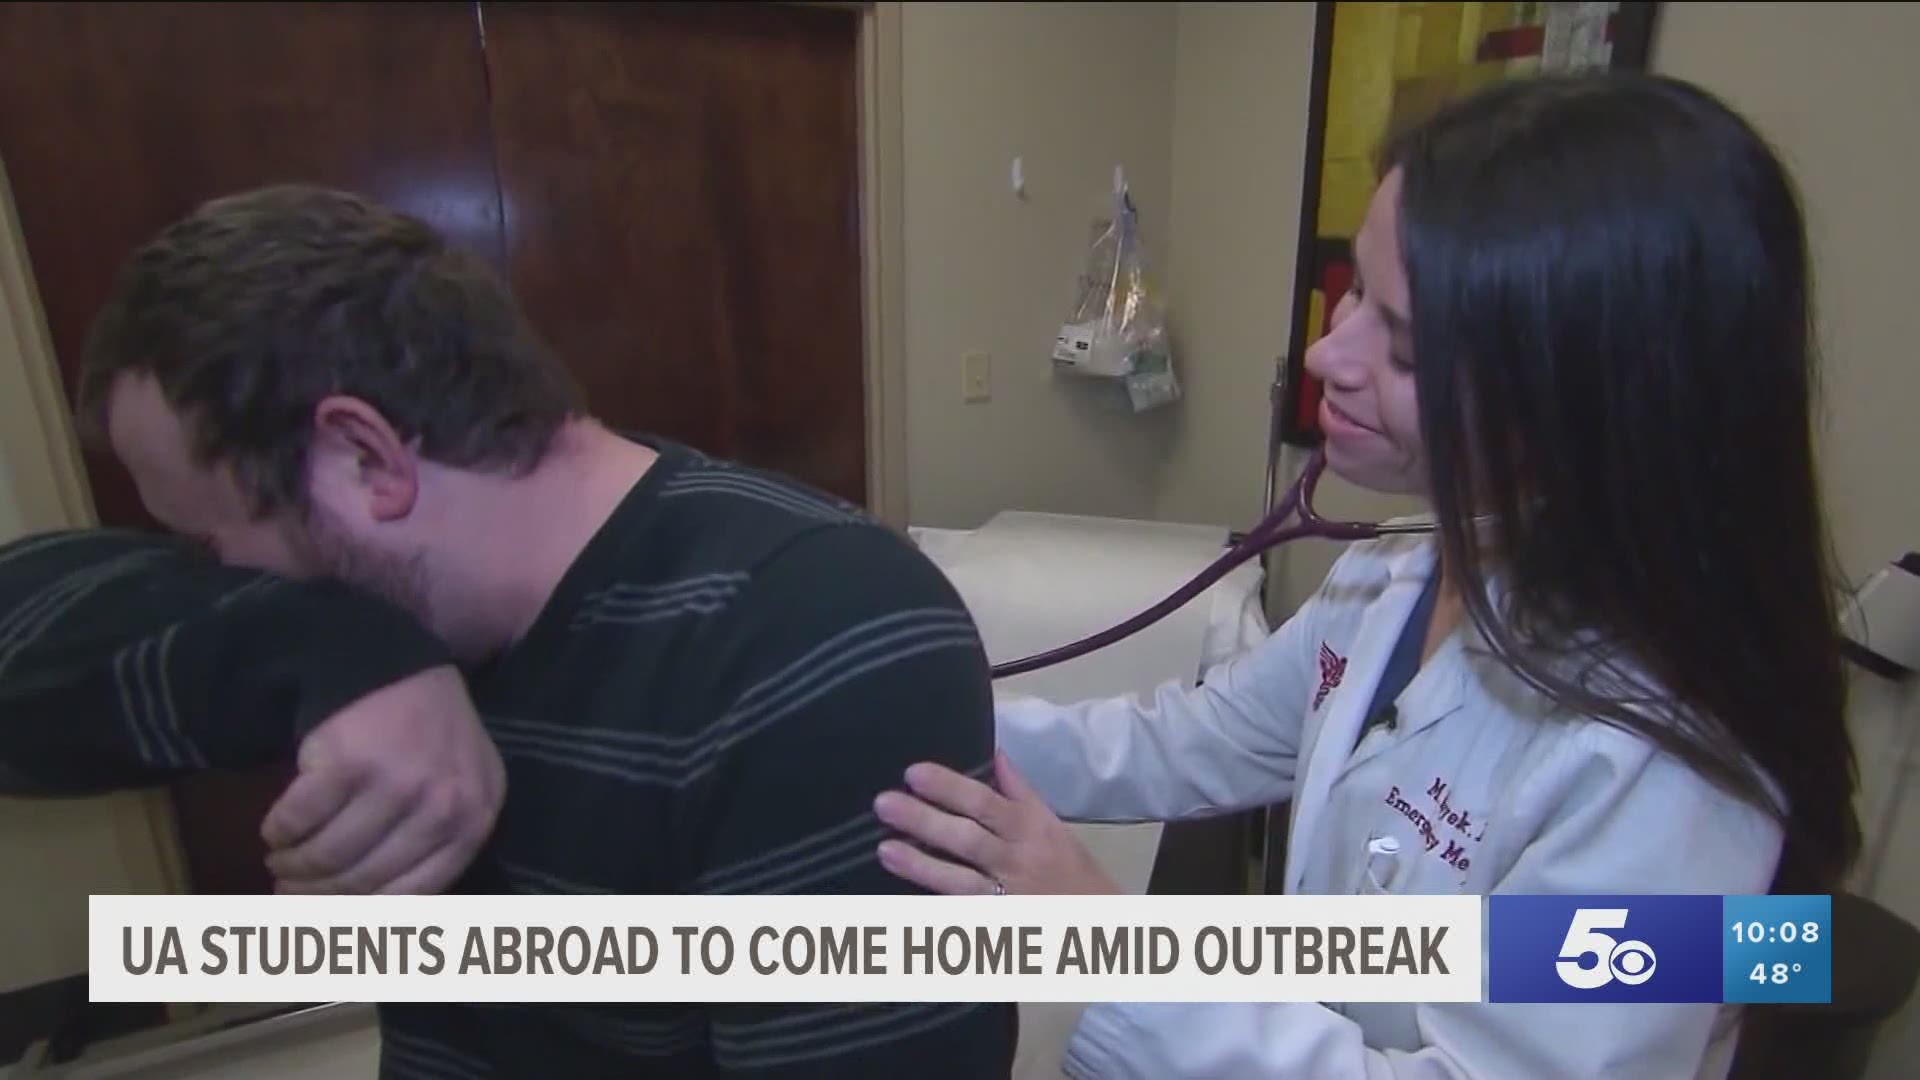 All University of Arkansas students currently studying abroad in Italy will return to the U.S. amid Coronavirus concerns.